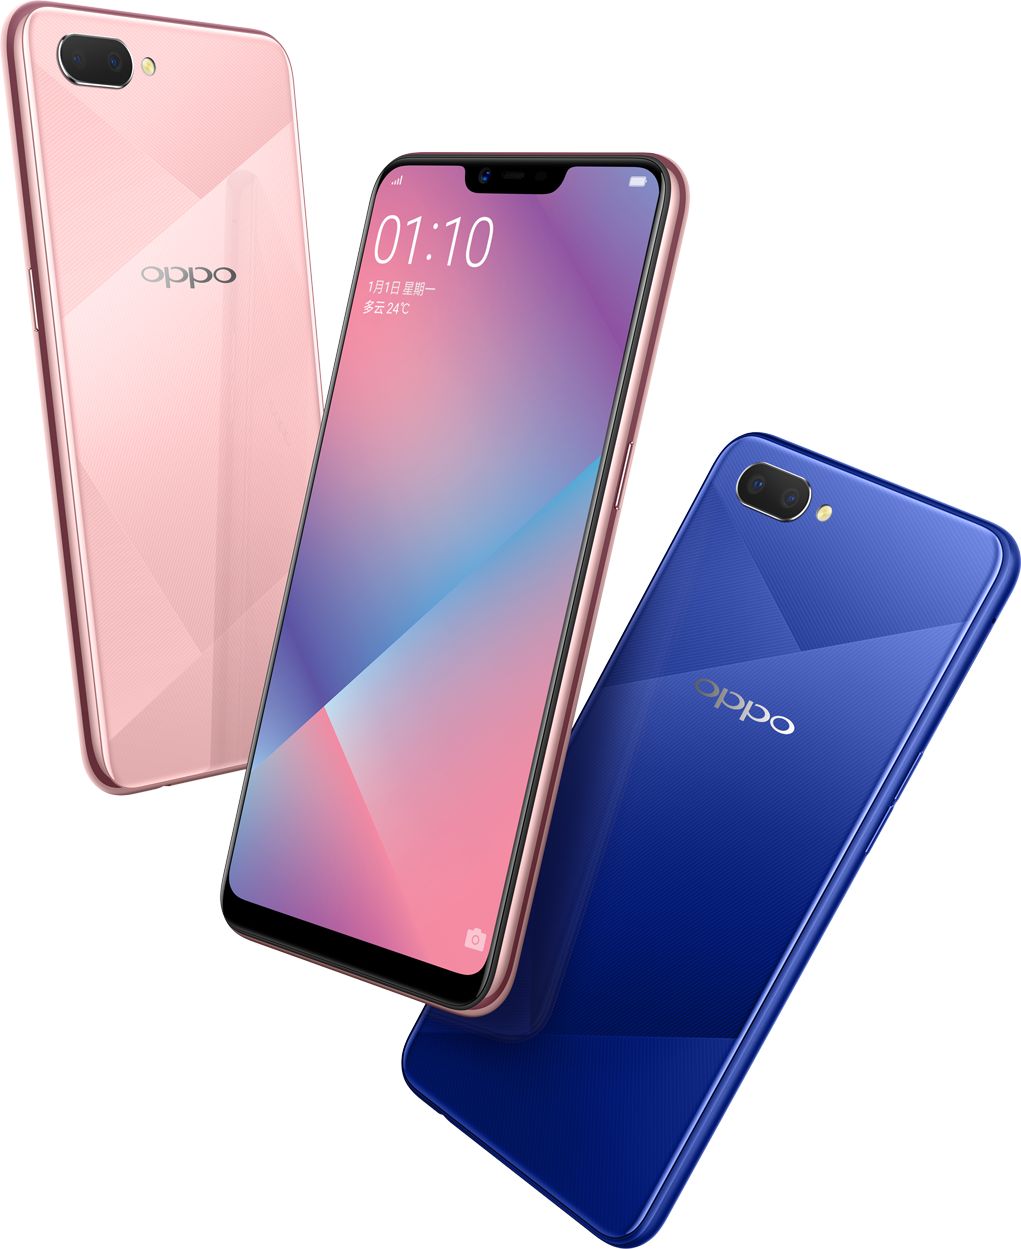 Орро x7. Oppo a5 2021. Oppo a5 2019. Oppo as5. Oppo a5 2015.